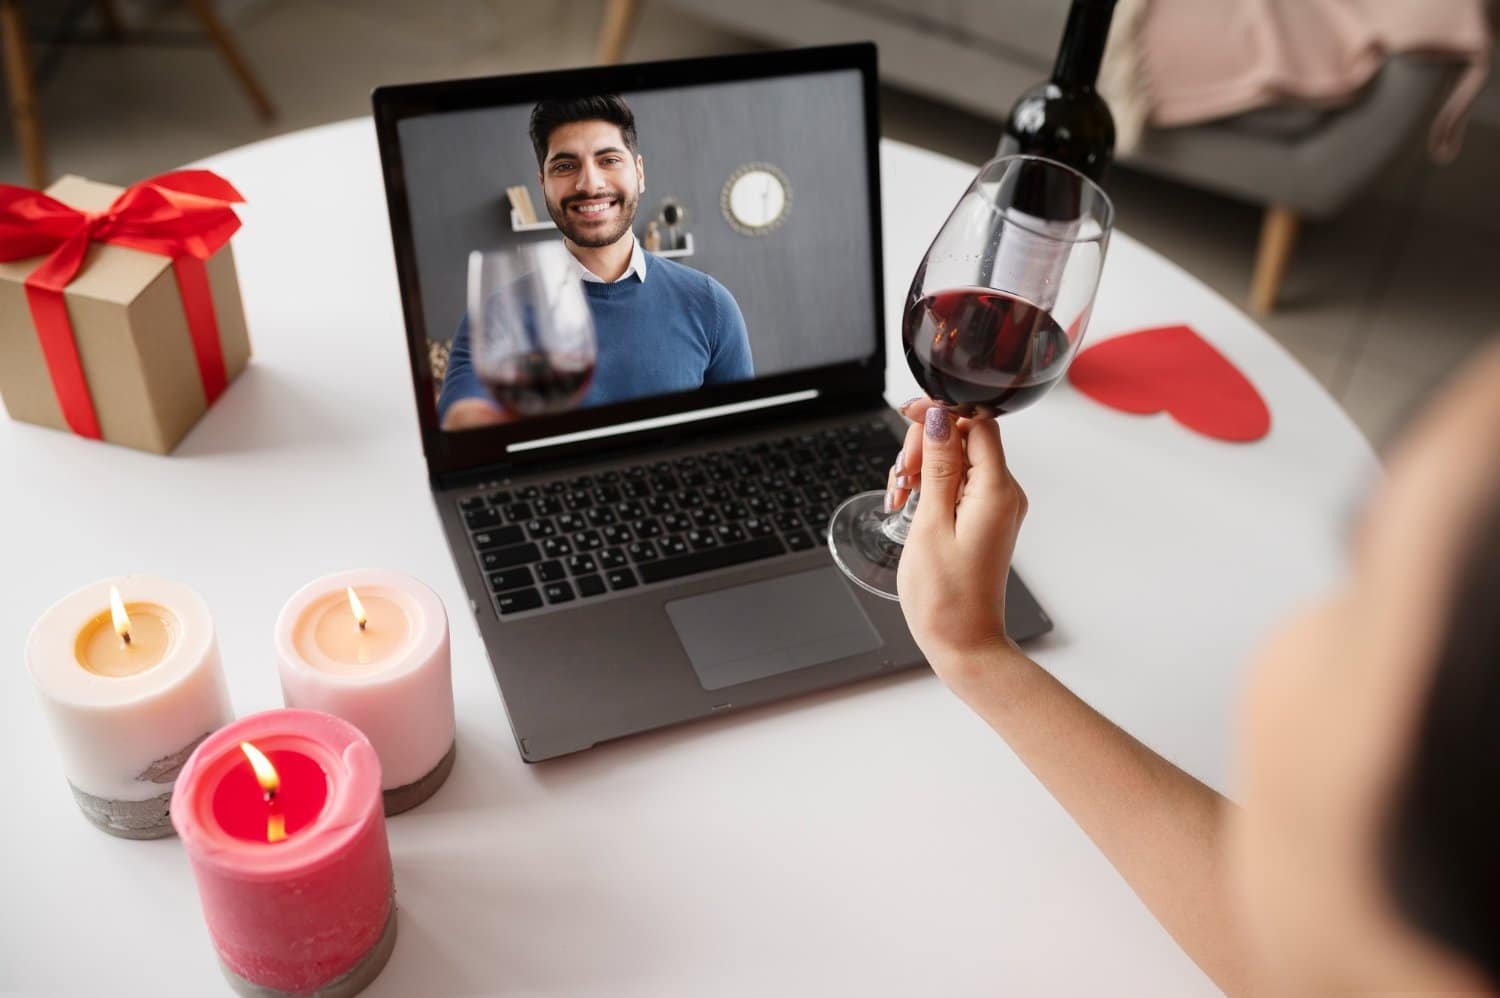 You are currently viewing The Impact of Video Chats on Online Dating